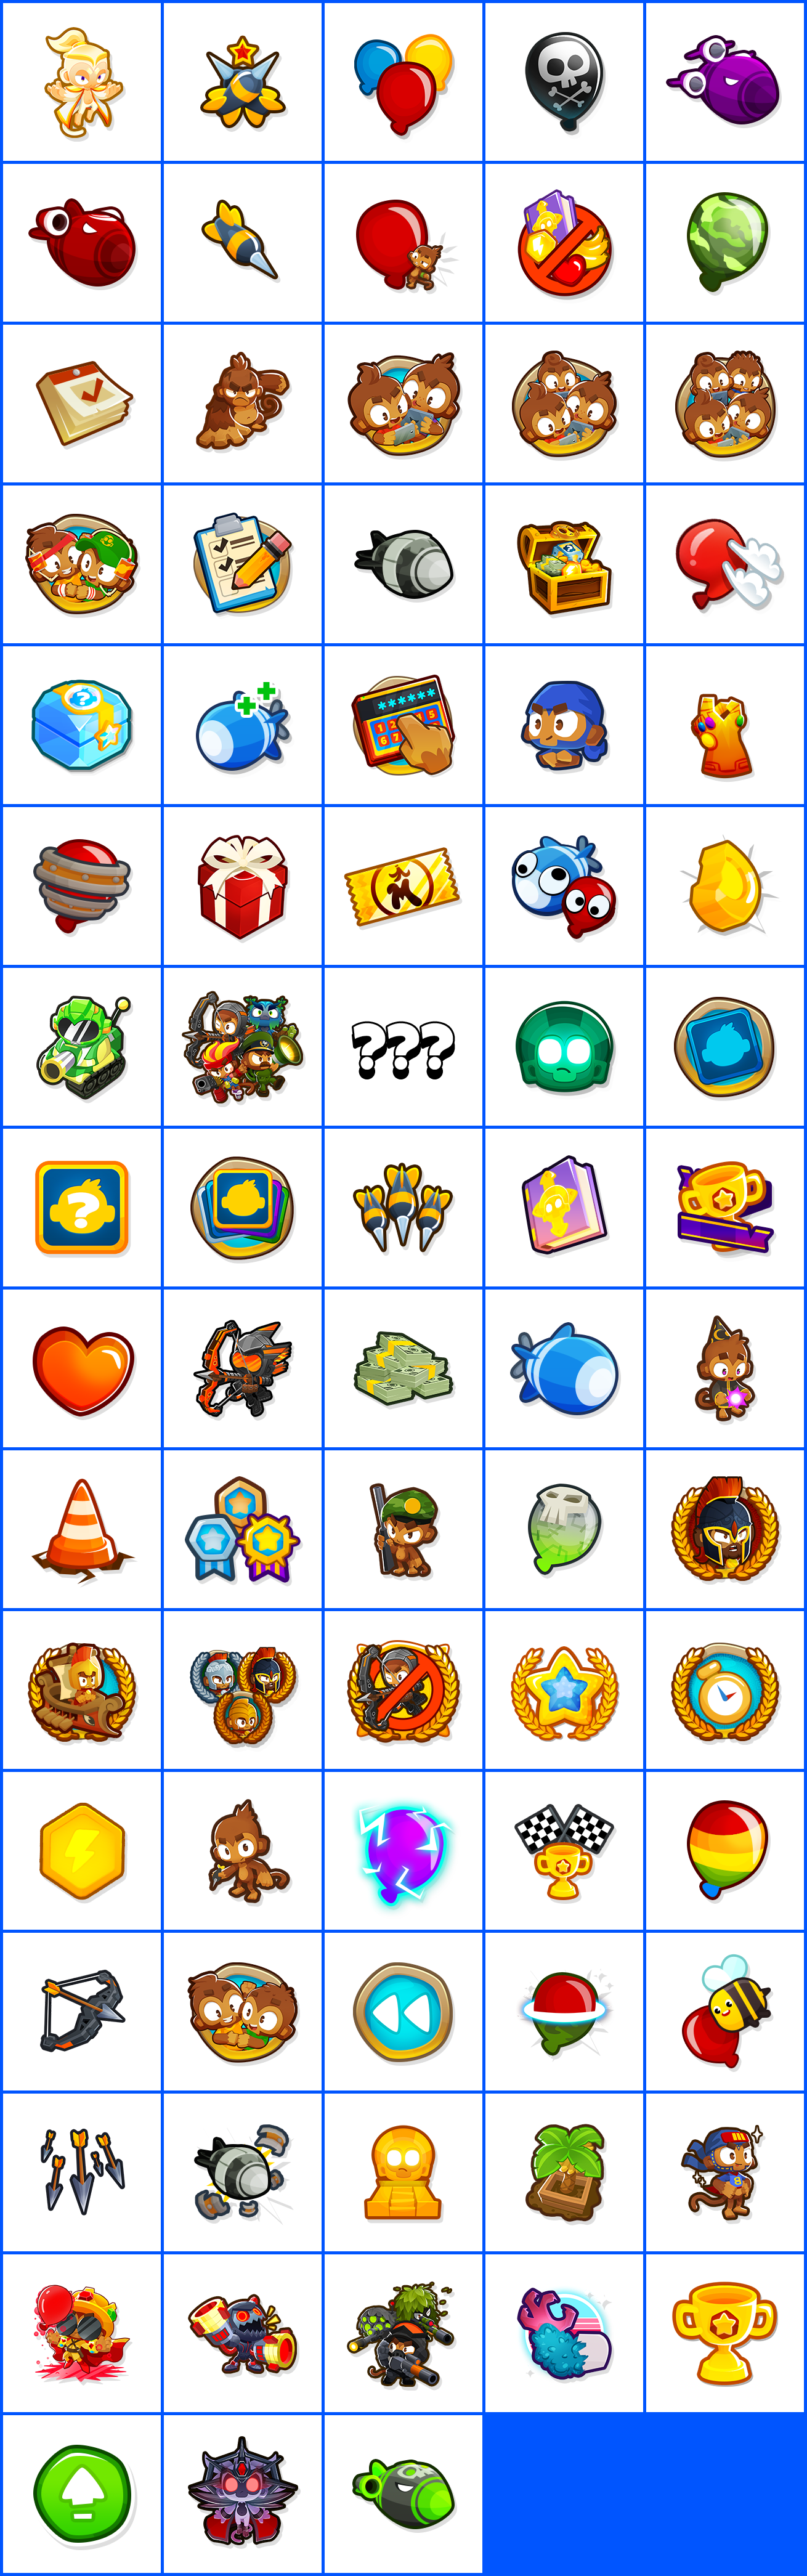 Bloons Tower Defense 6 - Achievement Icons